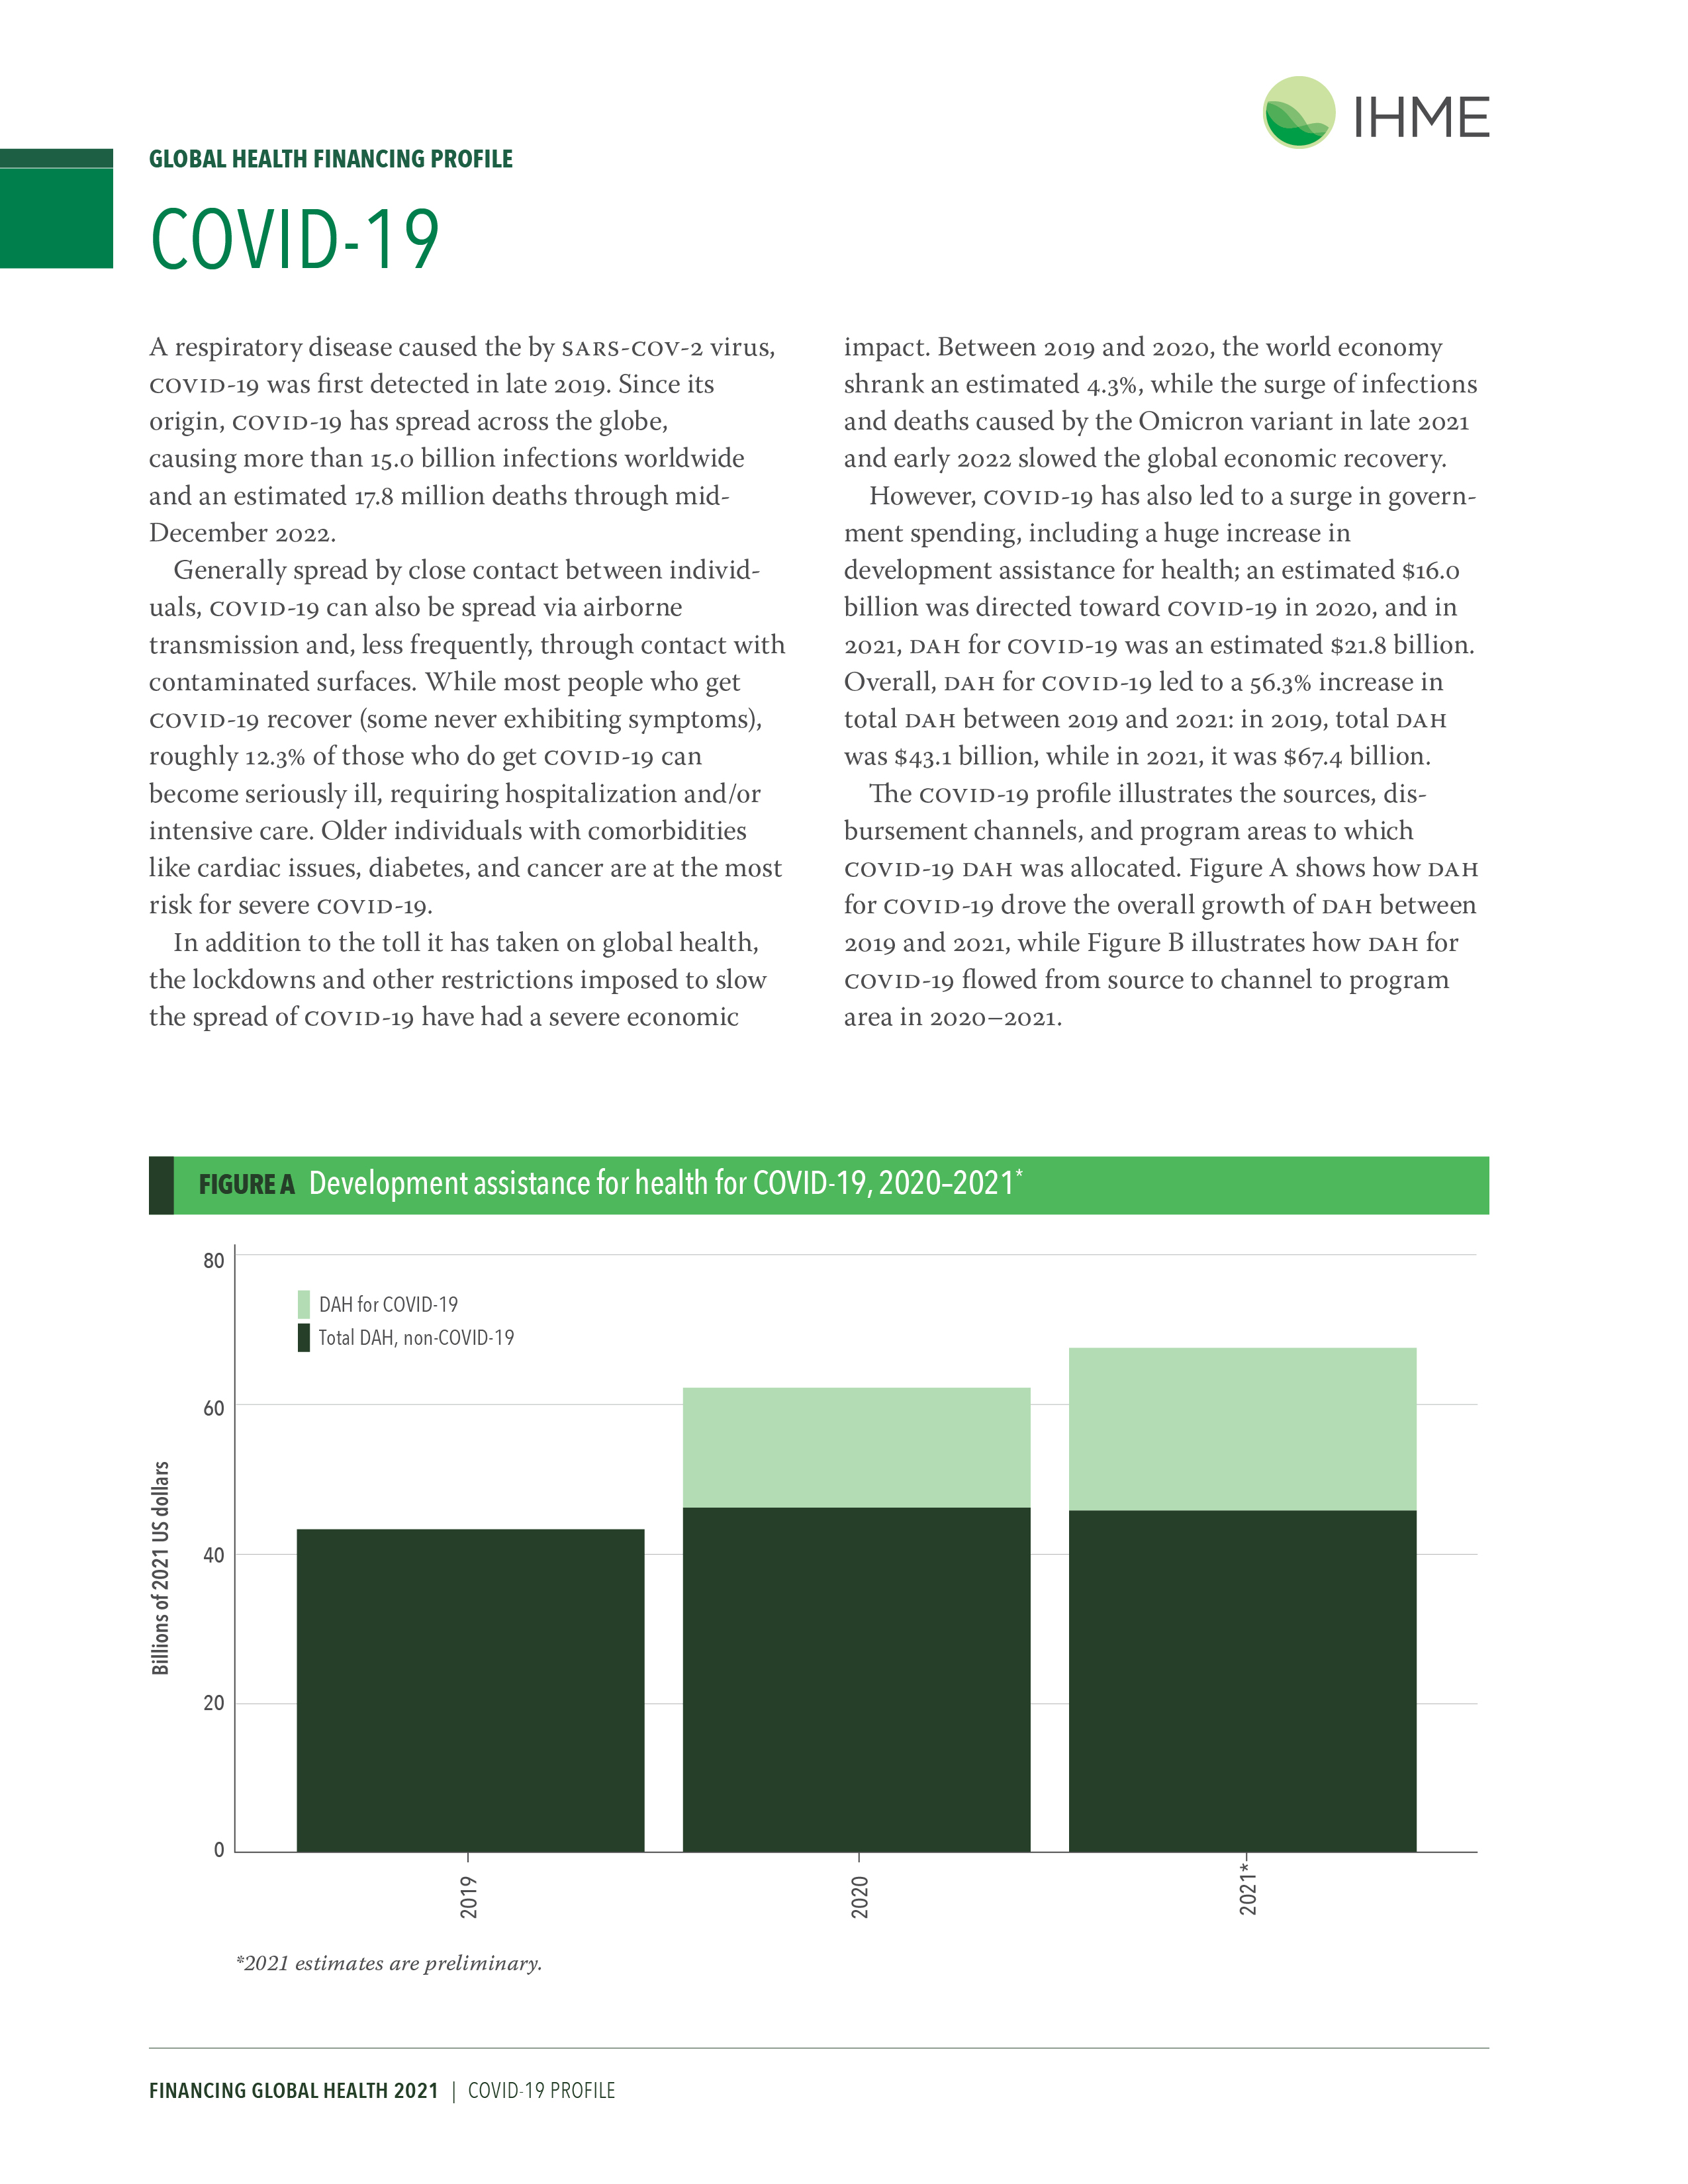 Disease spending profile for COVID-19: page 1 provides an overview of the expenses of COVID-19 globally and development assistance for health. Download the profile for more details. 